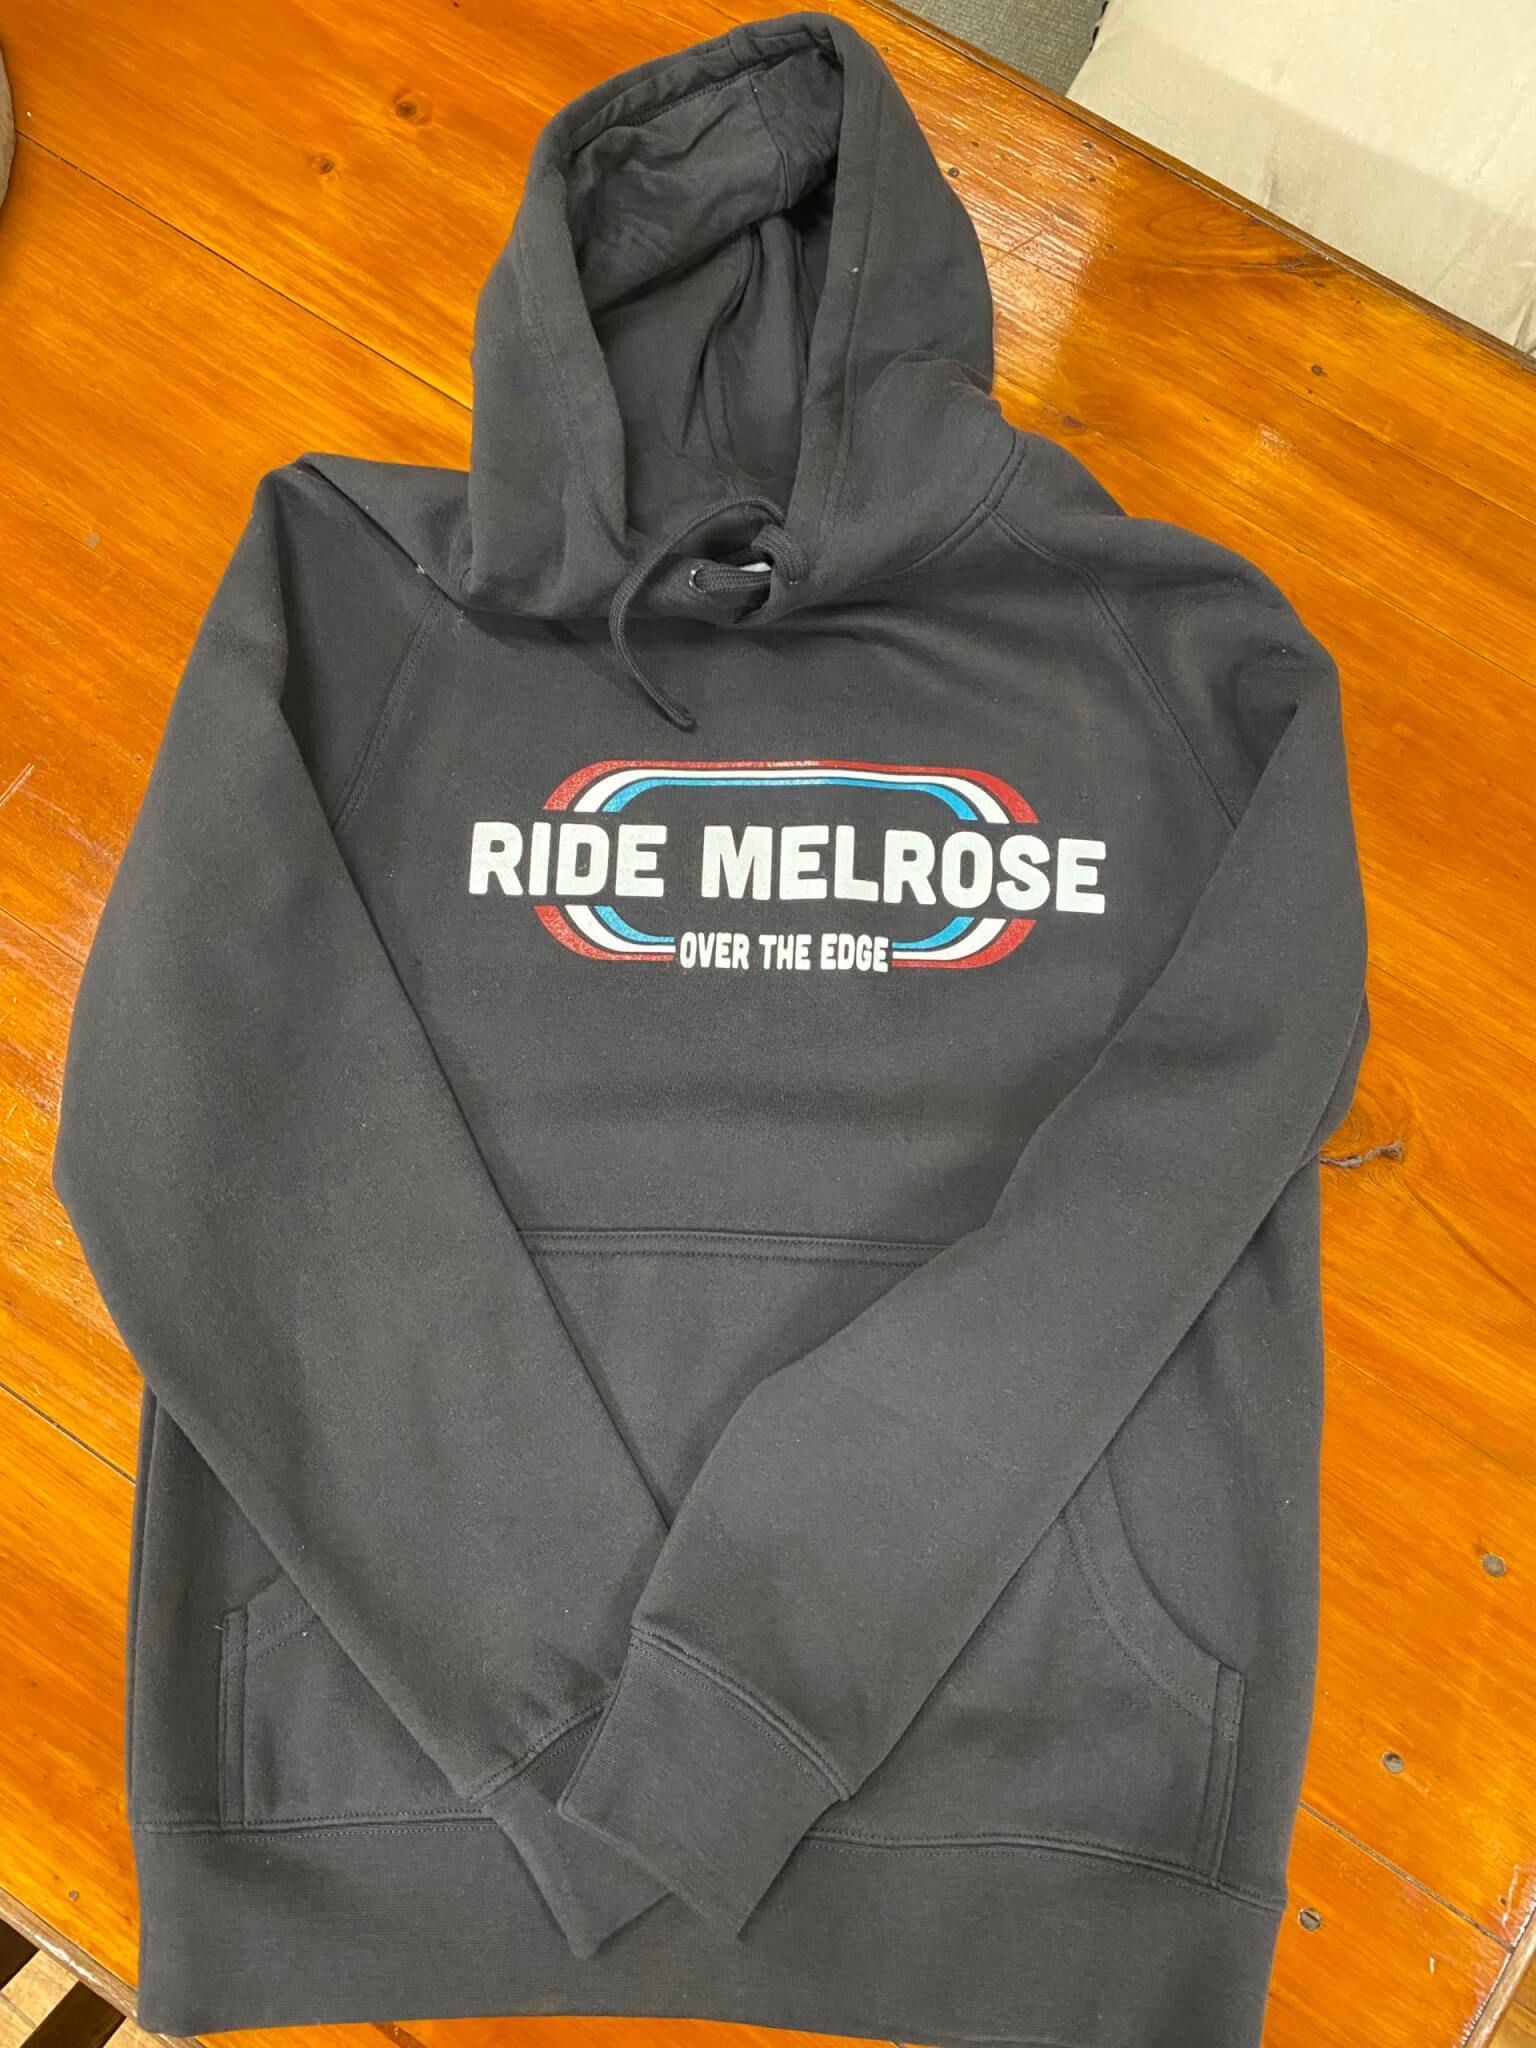 ADULT Hoody - Ride Melrose - Over The Edge Sports